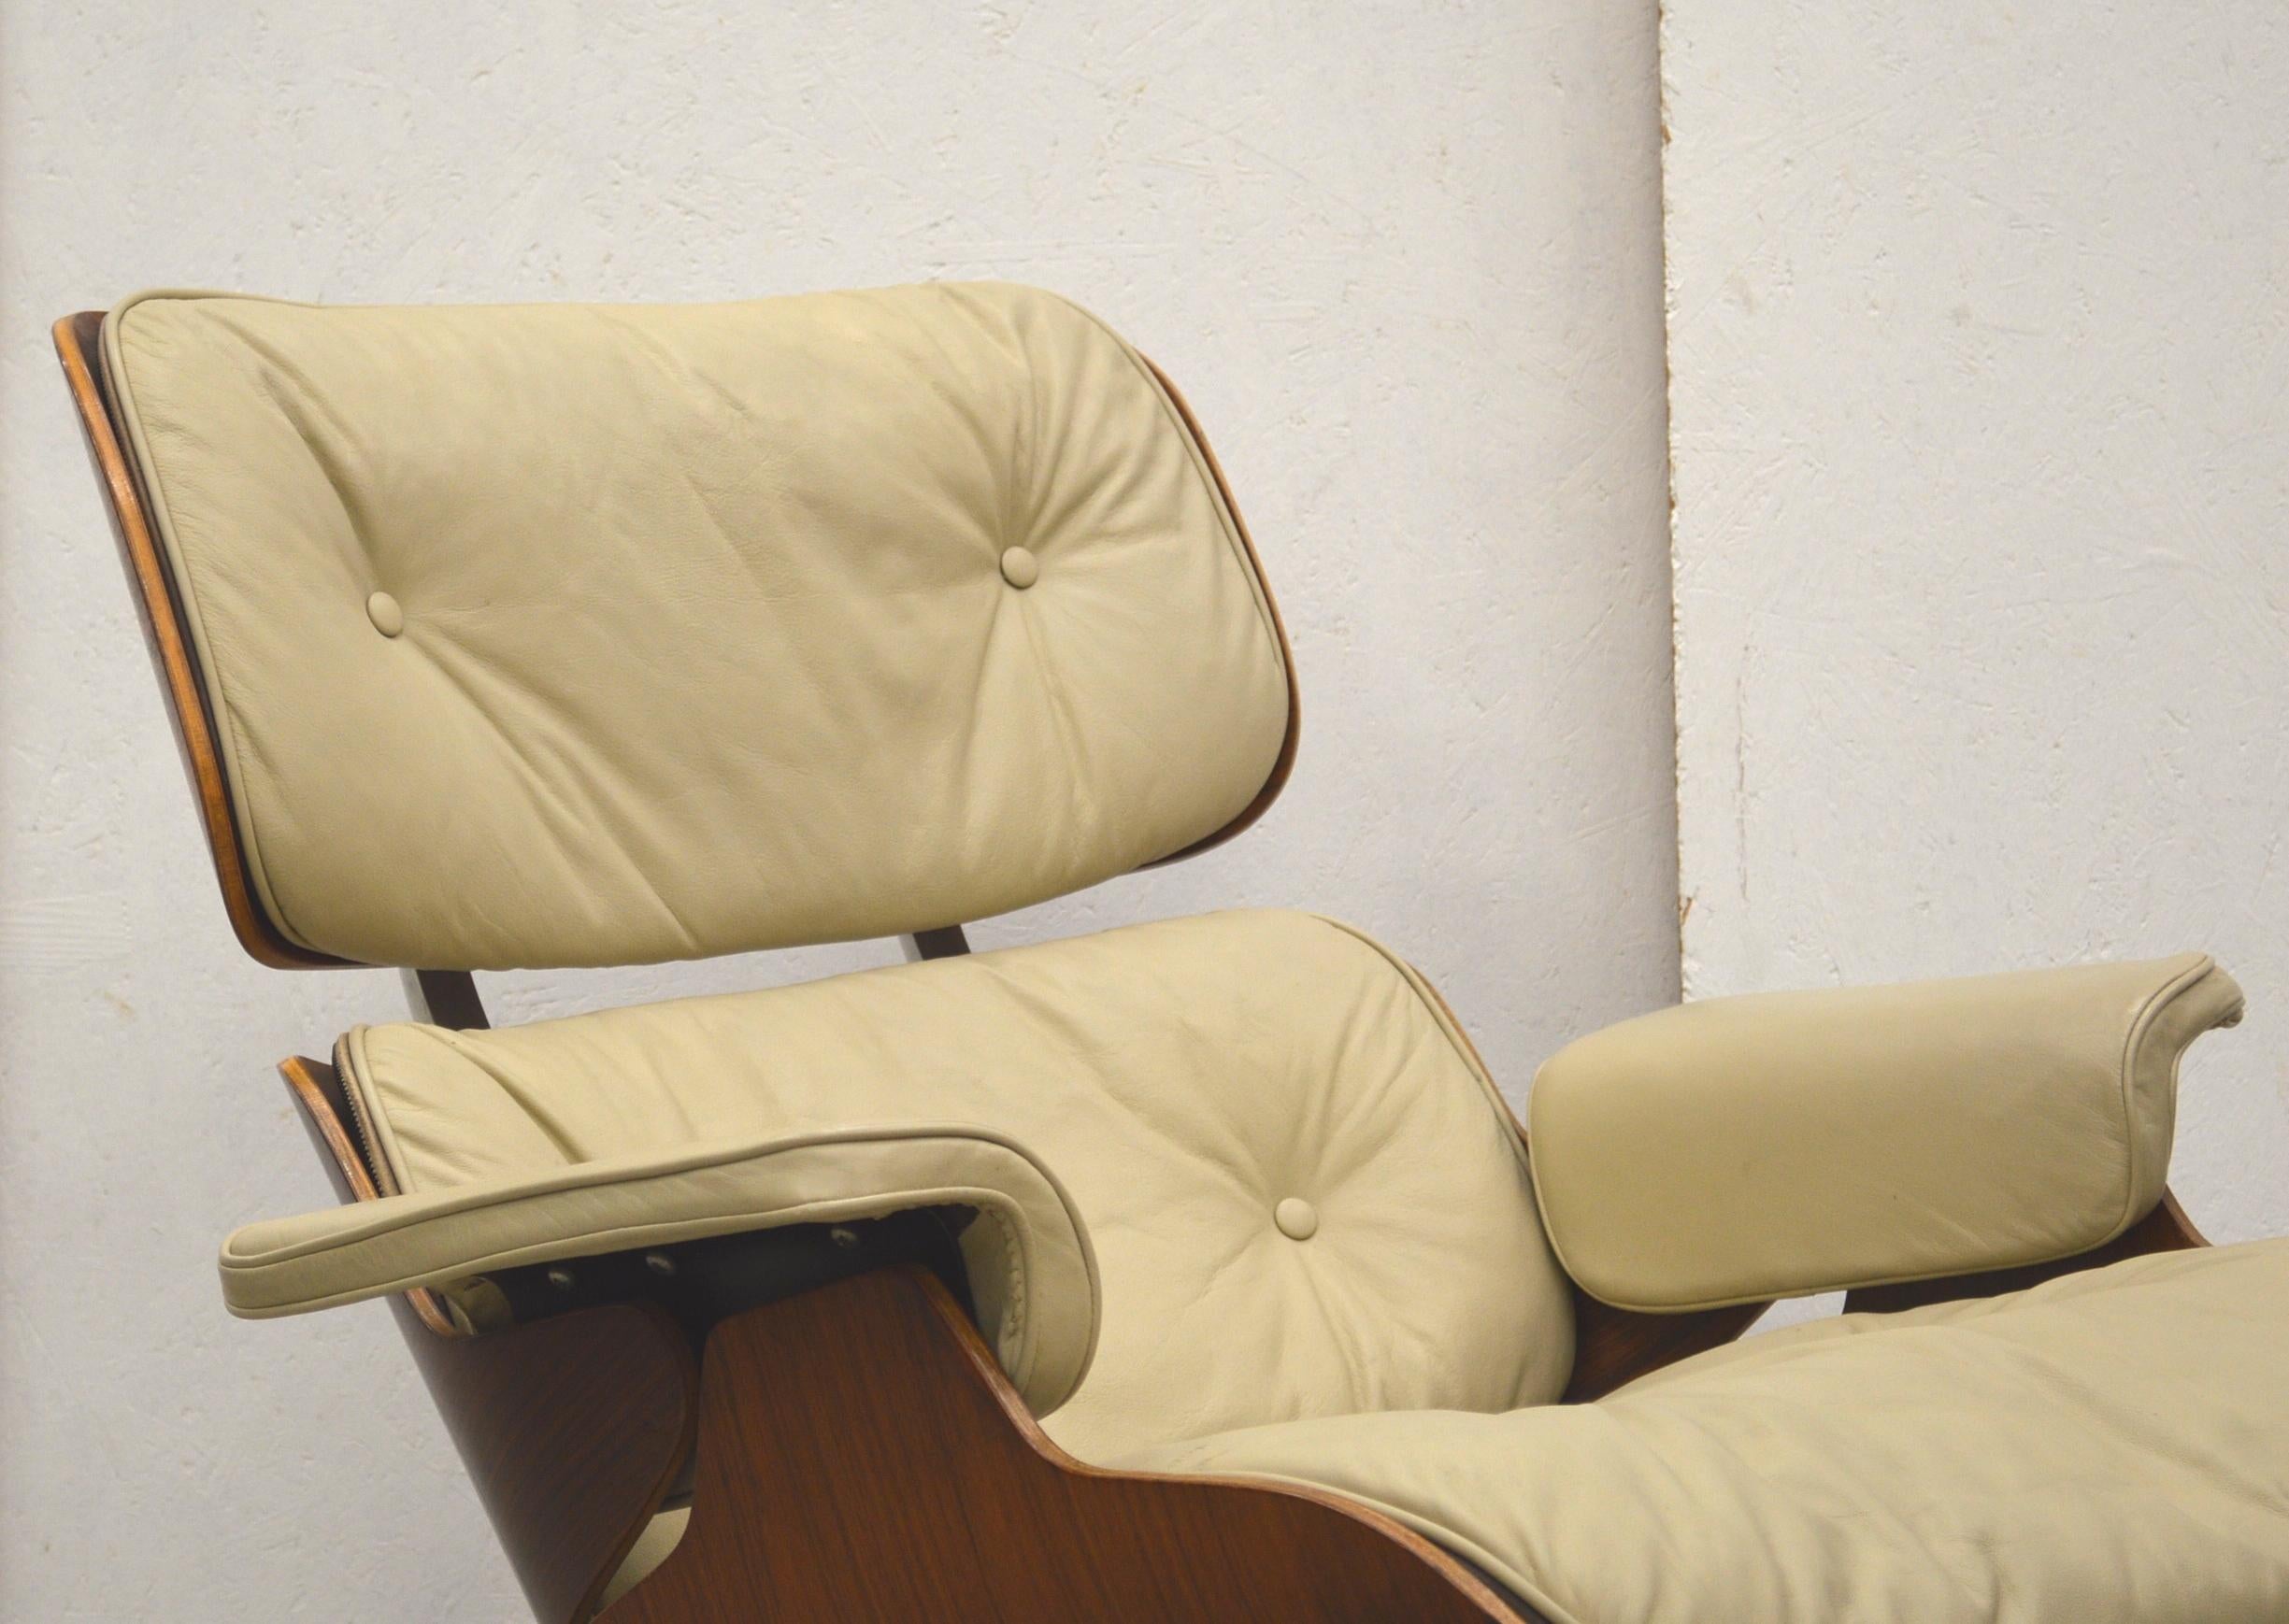 This rare lounge chair was designed by Charles & Ray Eames and were produced by Hille/Herman Miller in the late 1950s. It is one of the very first lounge chairs which were produced in Europe.

It is a very early example which features important